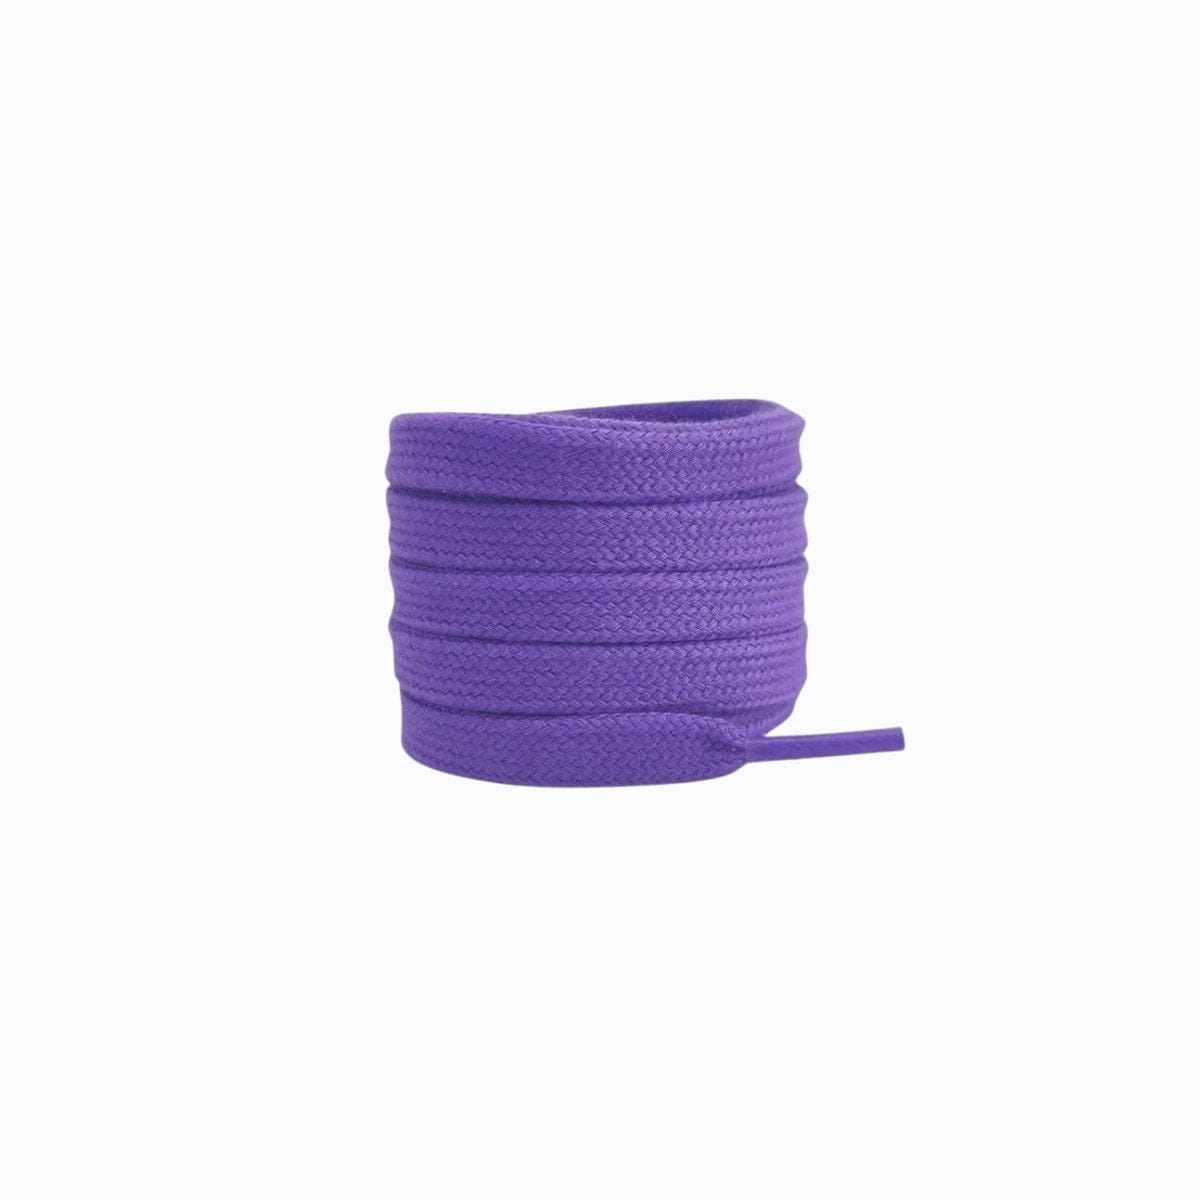 Purple Replacement Adidas Shoe Laces for Adidas Samba OG Sneakers by Kicks Shoelaces